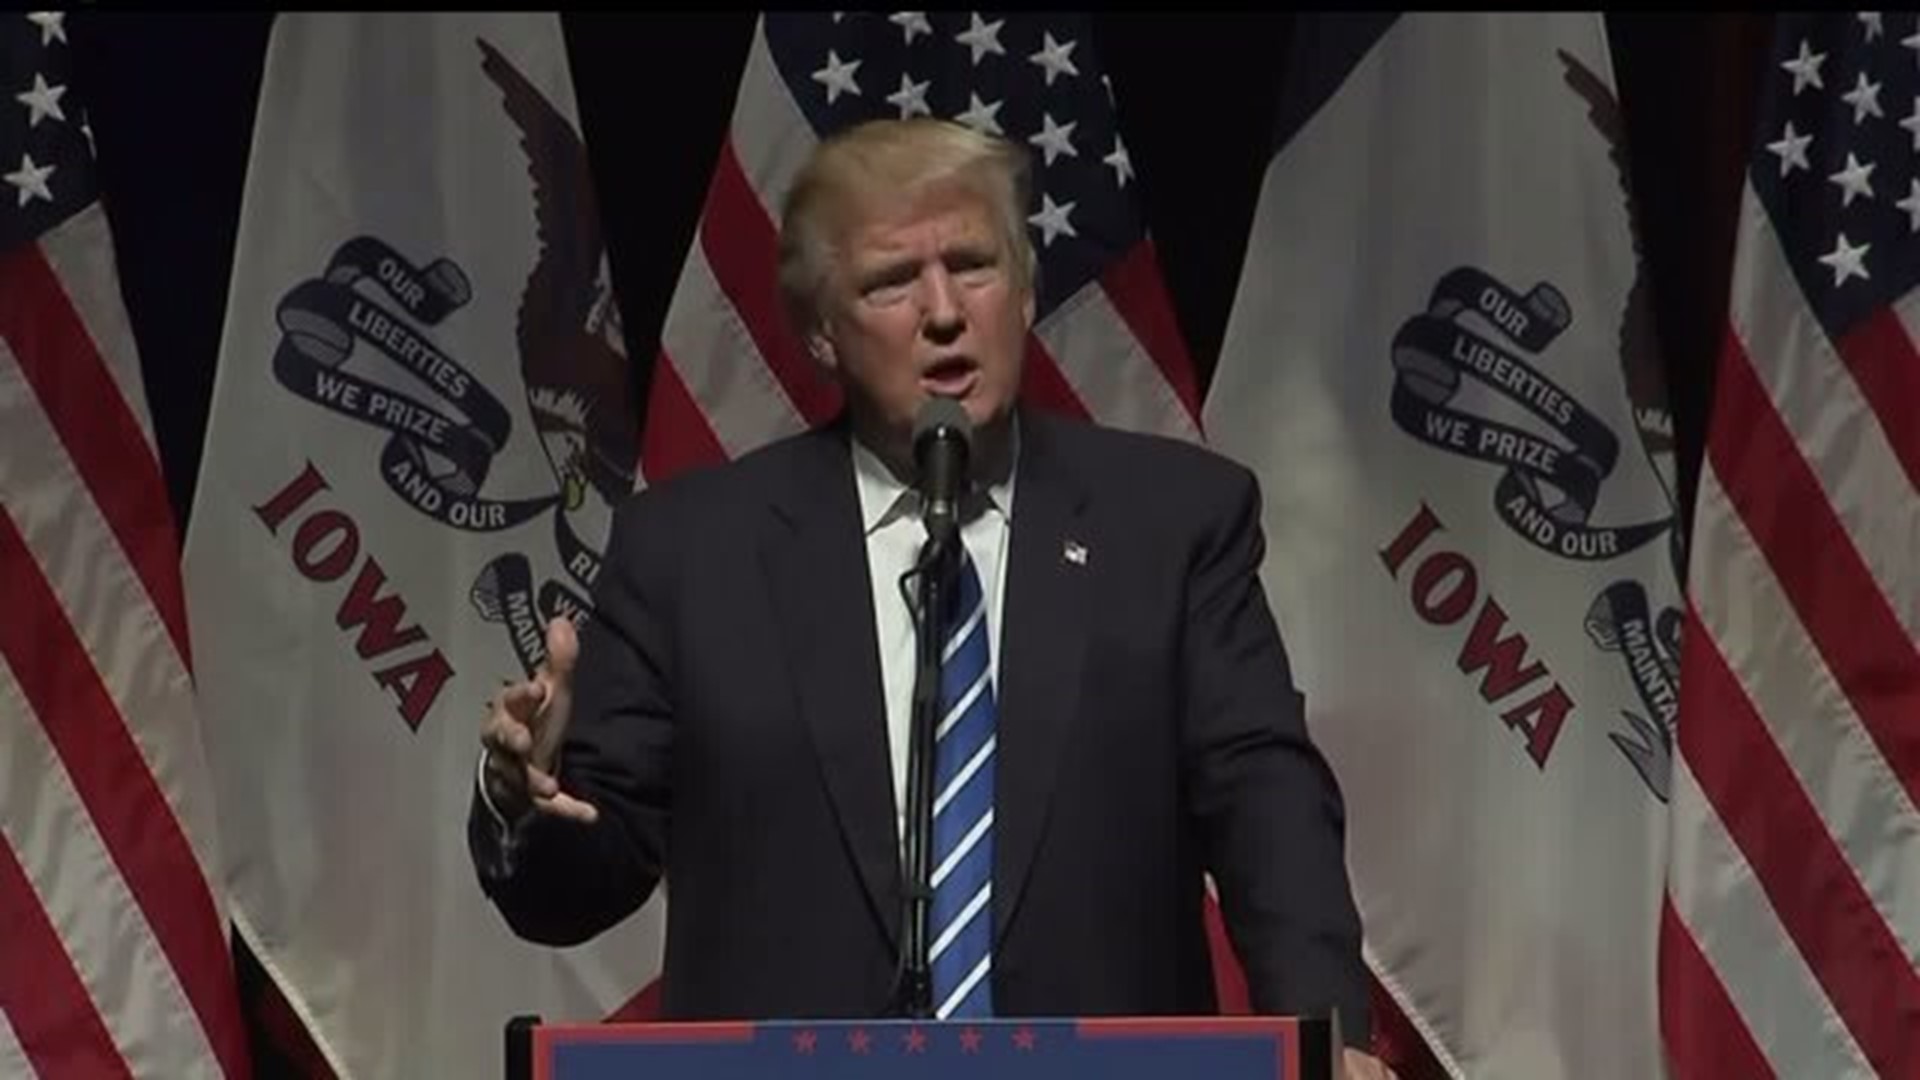 What Donald Trump had to say in Davenport